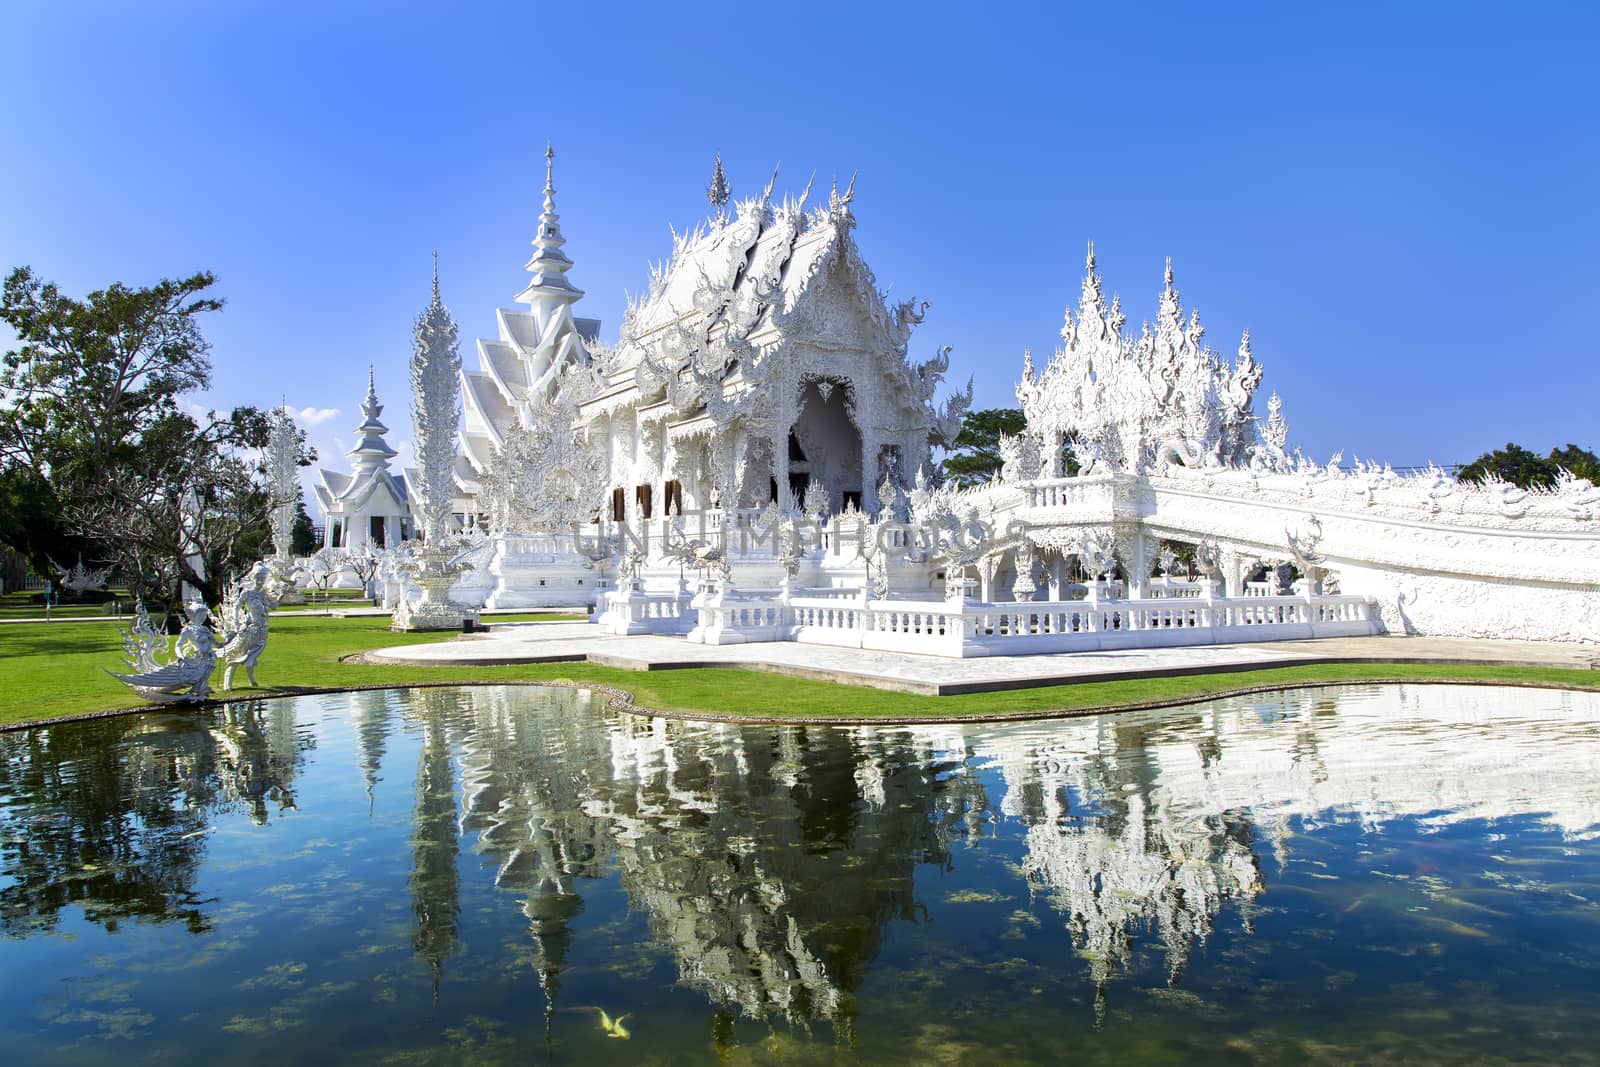 Wat Rong Khun (White Temple) is a unconventional Buddhist temple in Thailand.